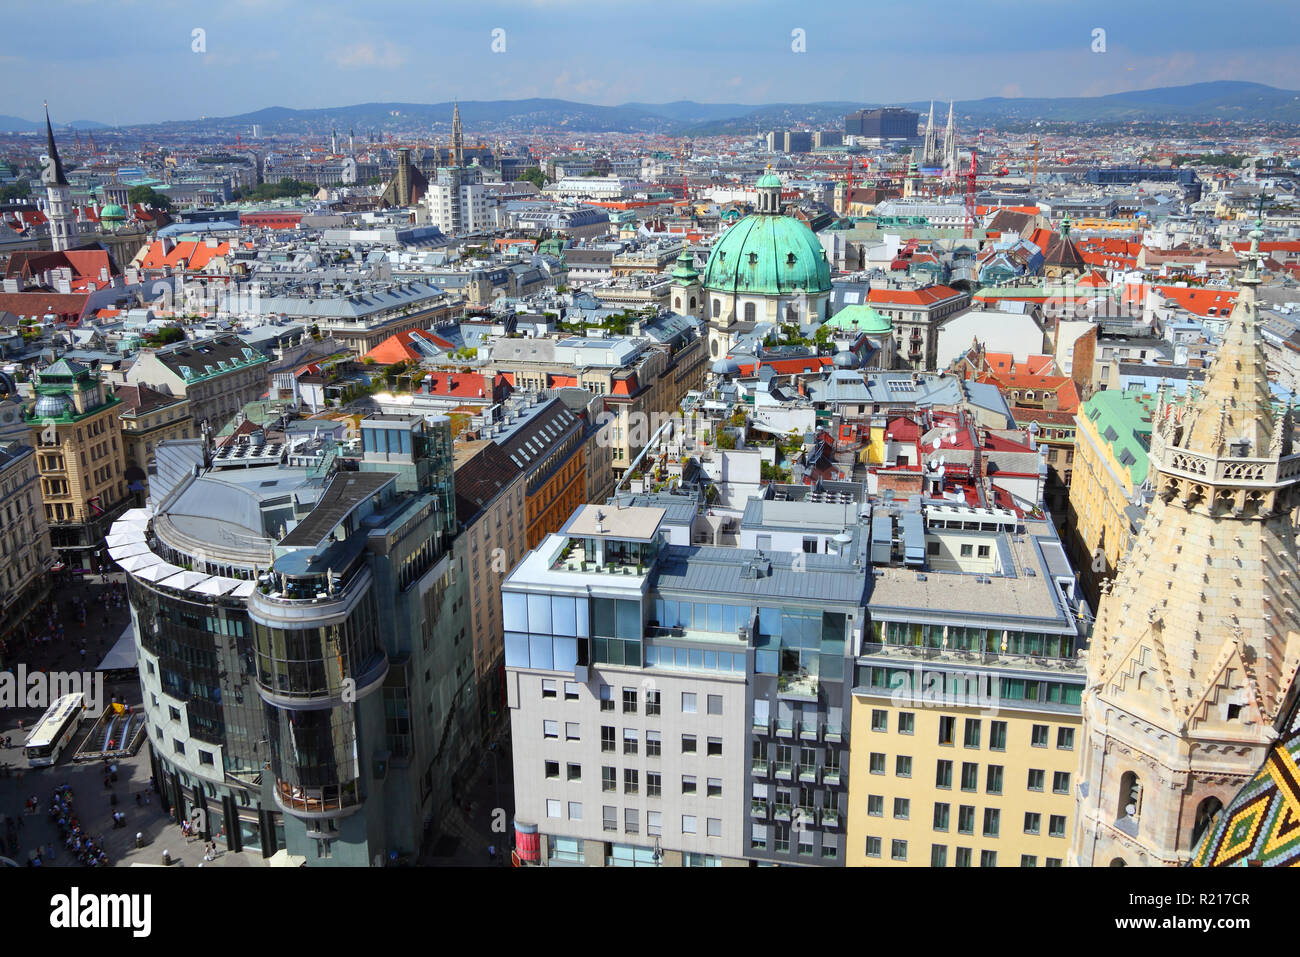 Vienna, Austria - aerial view of the Old Town, a UNESCO World Heritage Site. Stock Photo